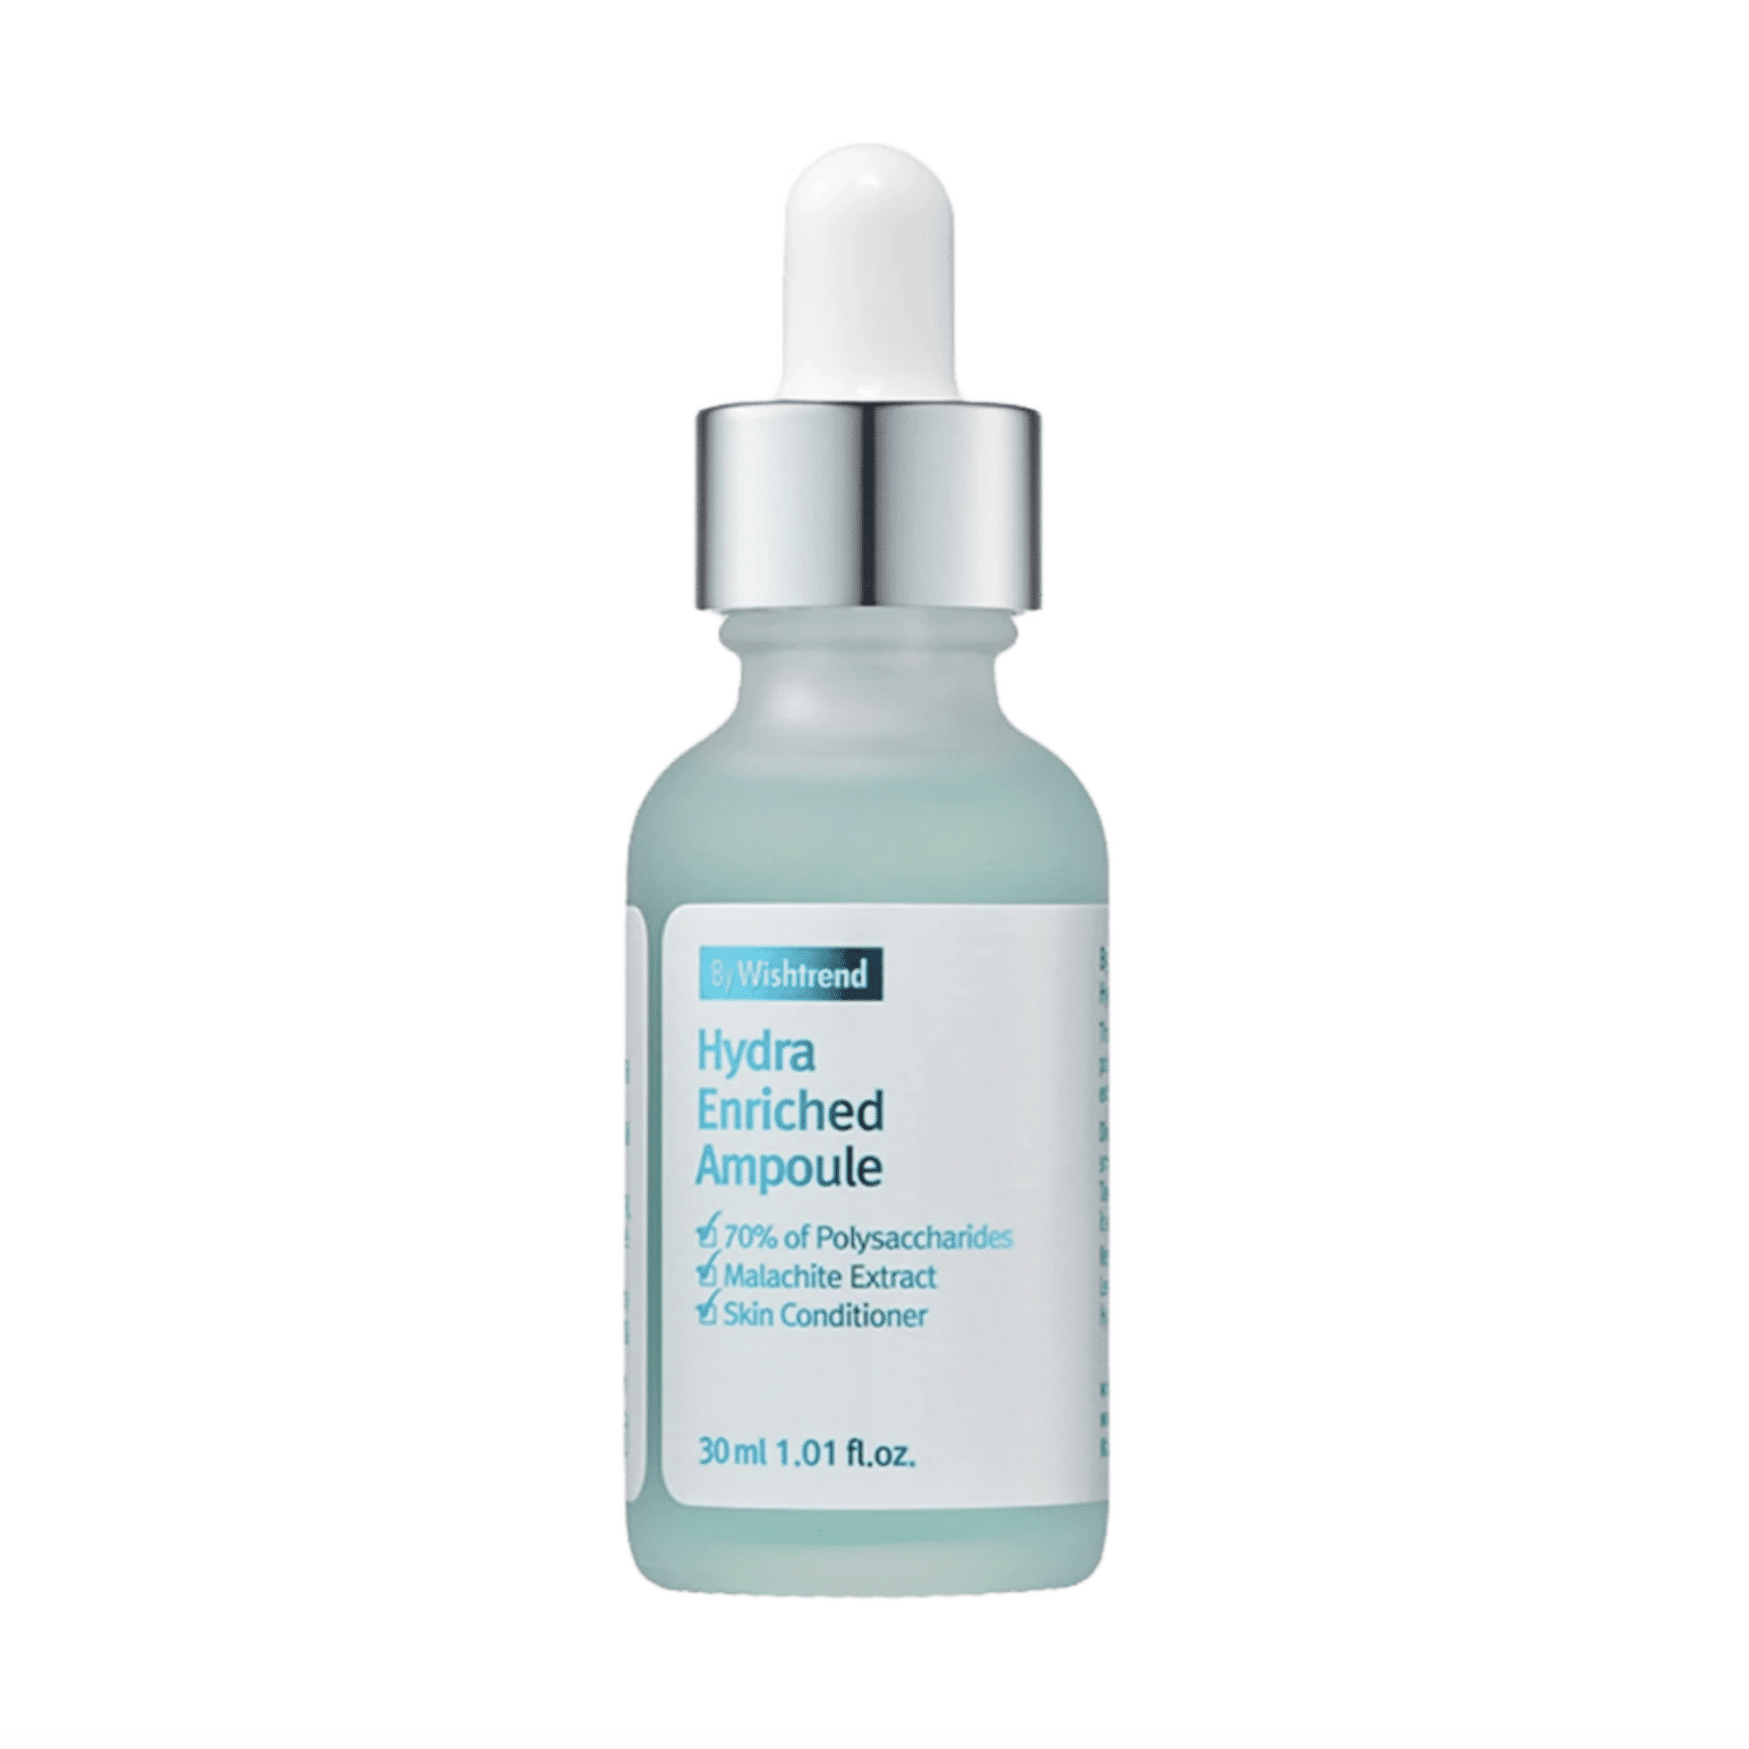 Se By Wishtrend - Hydra Enriched Ampoule hos Yu Beauti